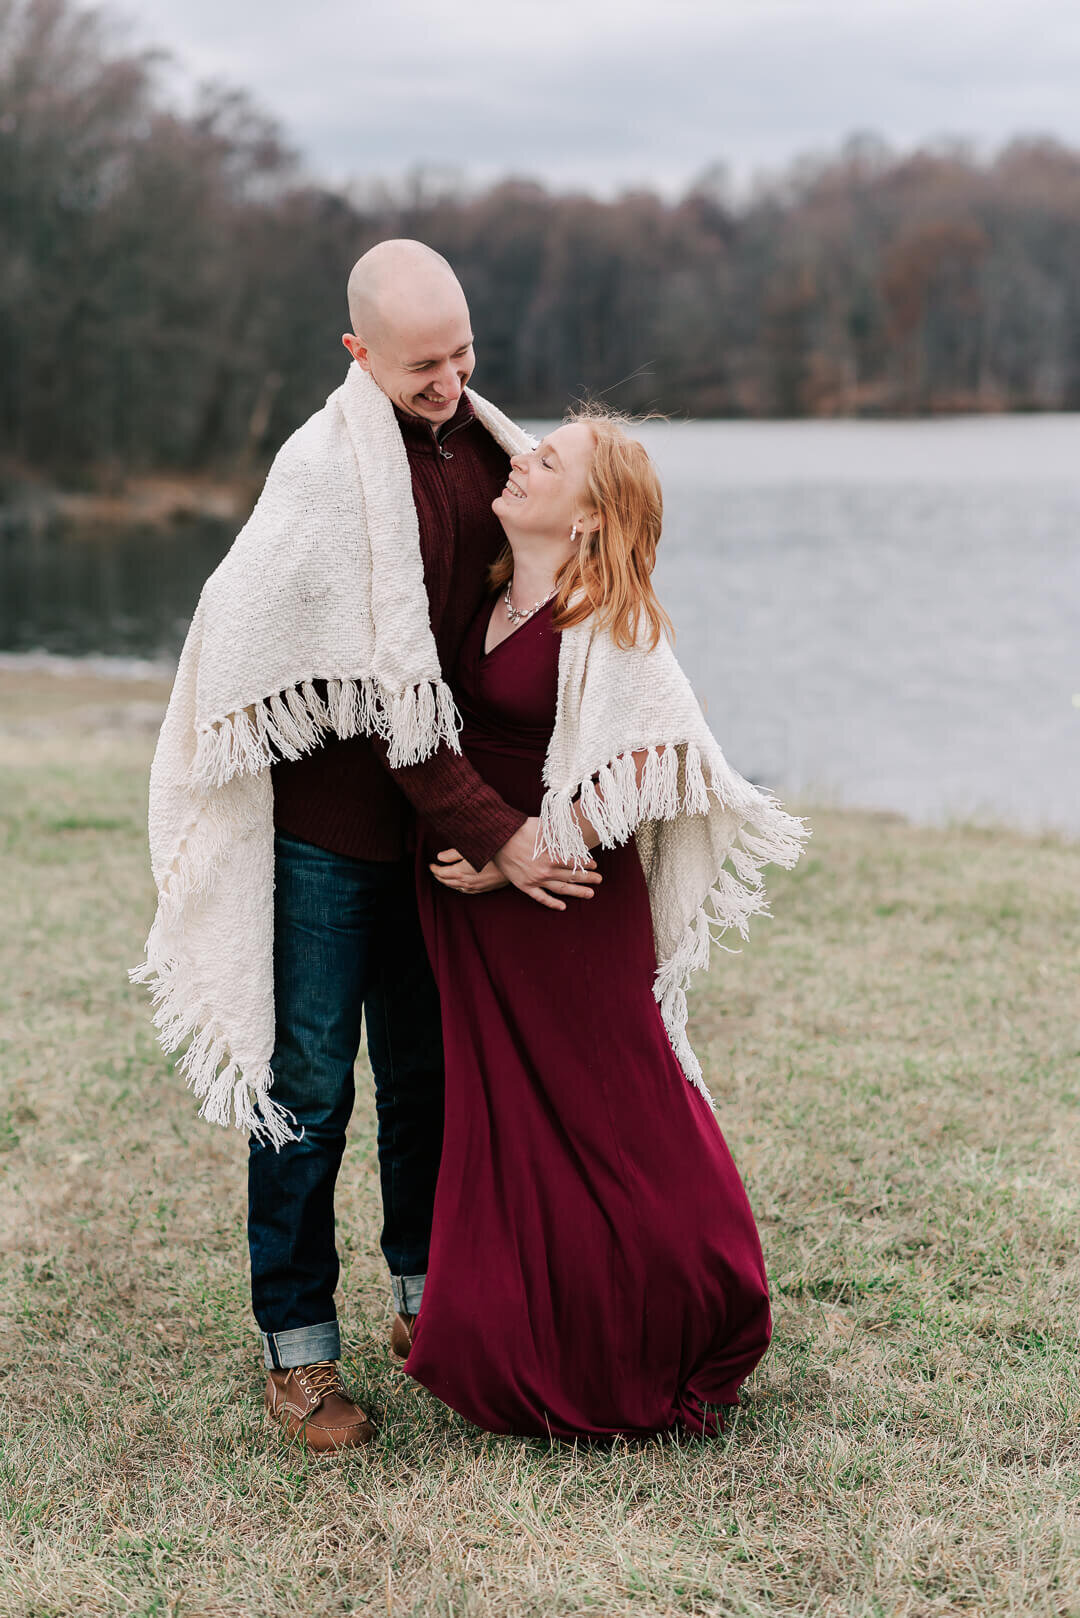 Soon-to-be parents laughing during their maternity session with northern virginia maternity photographer